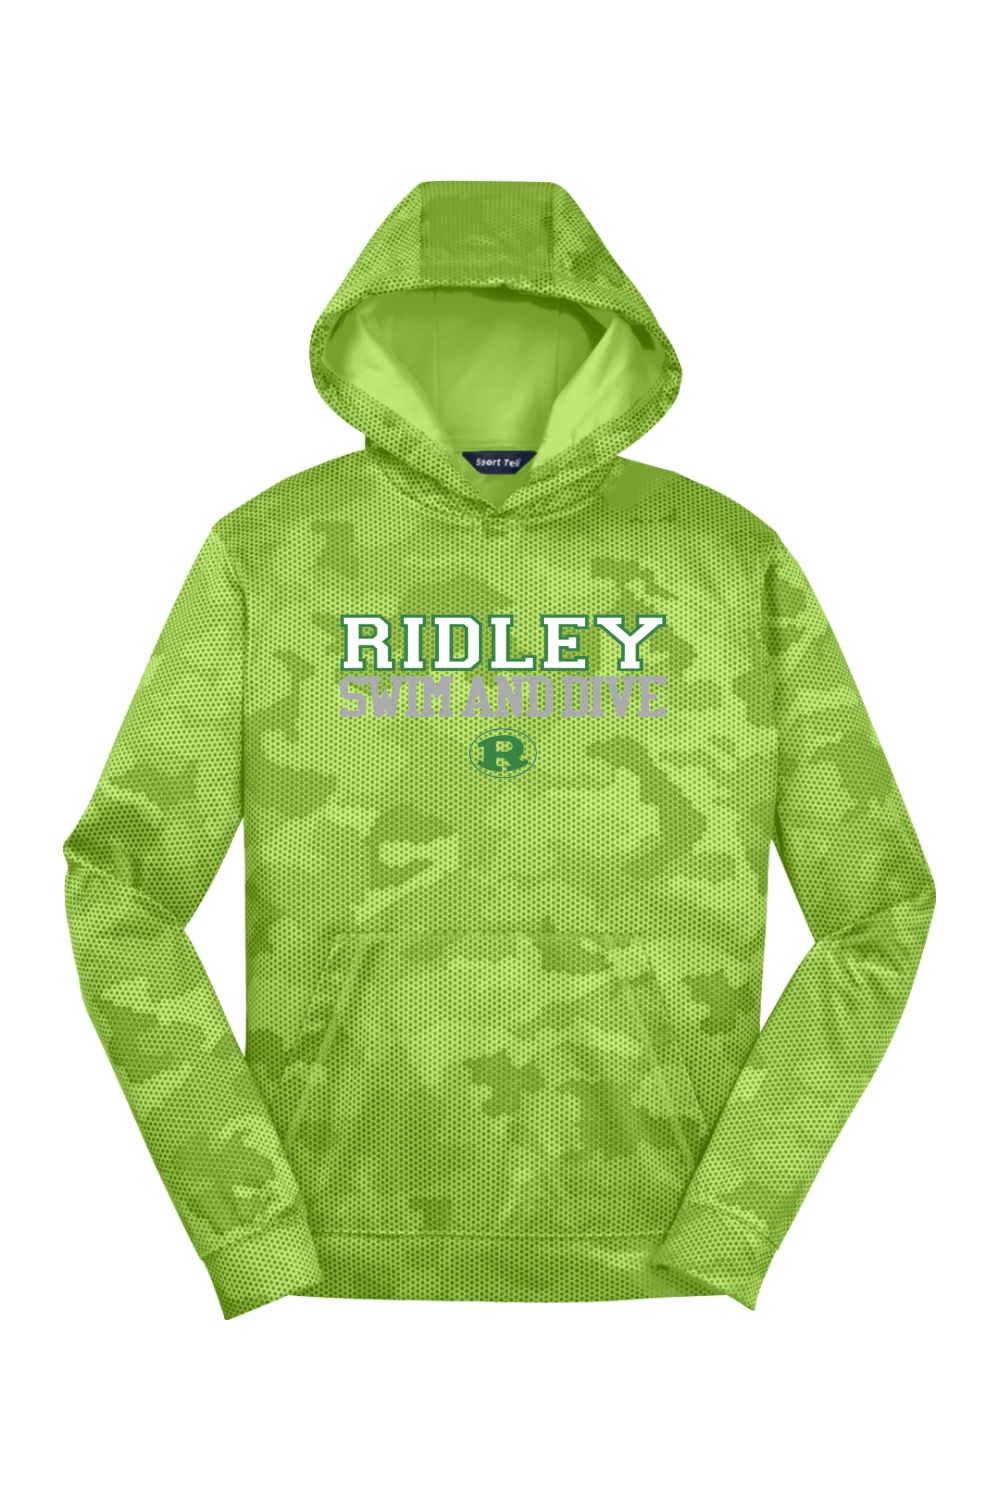 Ridley Swim and Dive Youth Sport-Tek Sport-Wick CamoHex Fleece Hooded Pullover